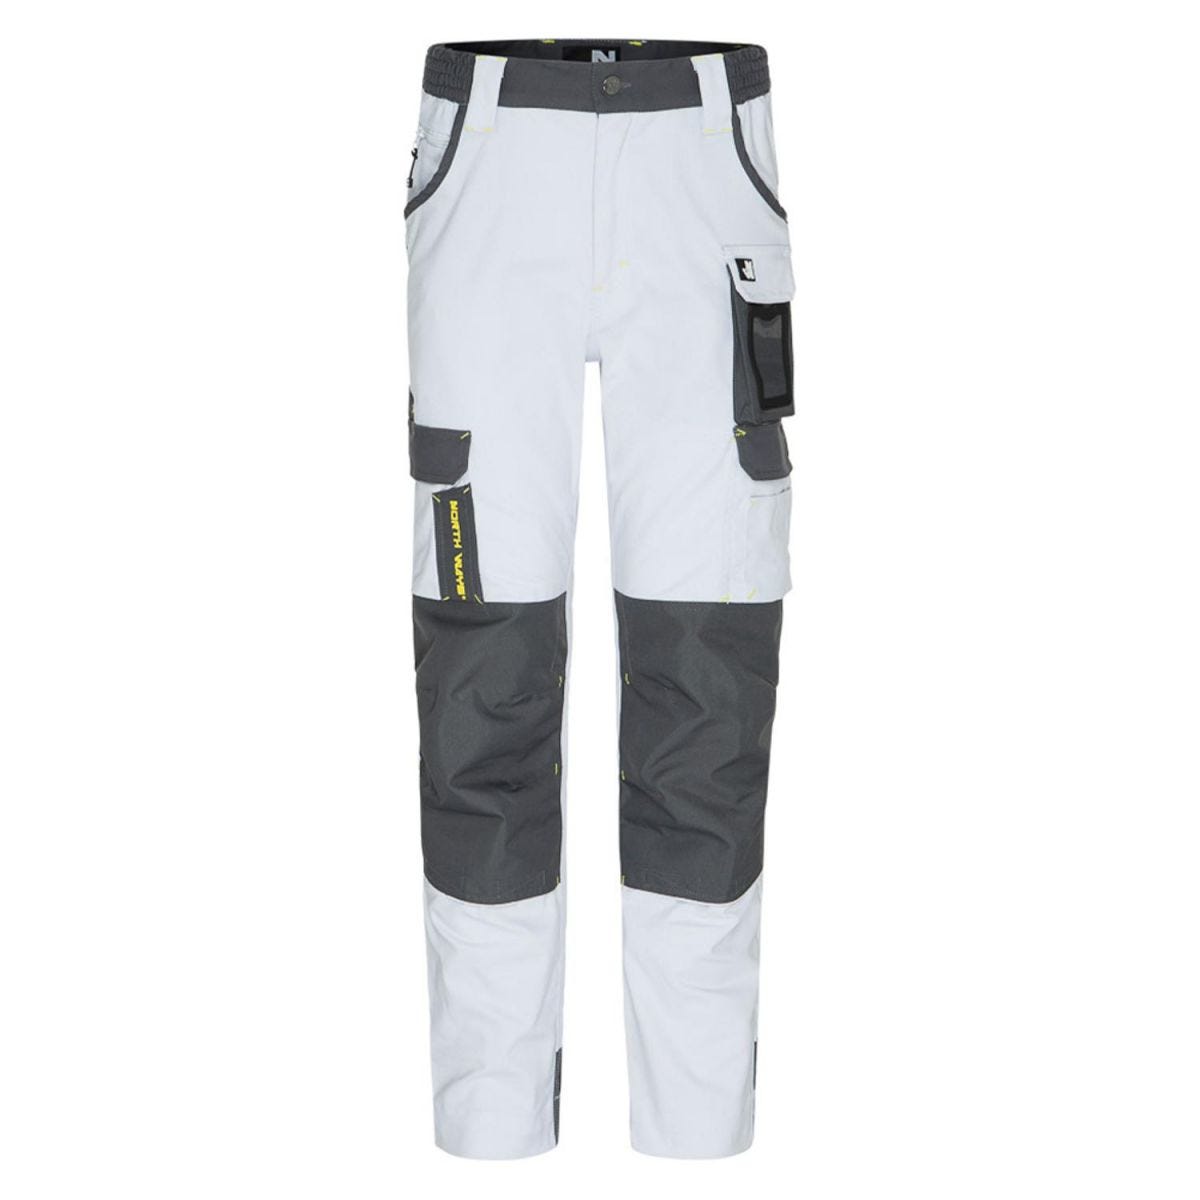 Pantalon de travail multipoches Cary blanc - North Ways - Taille 52 1